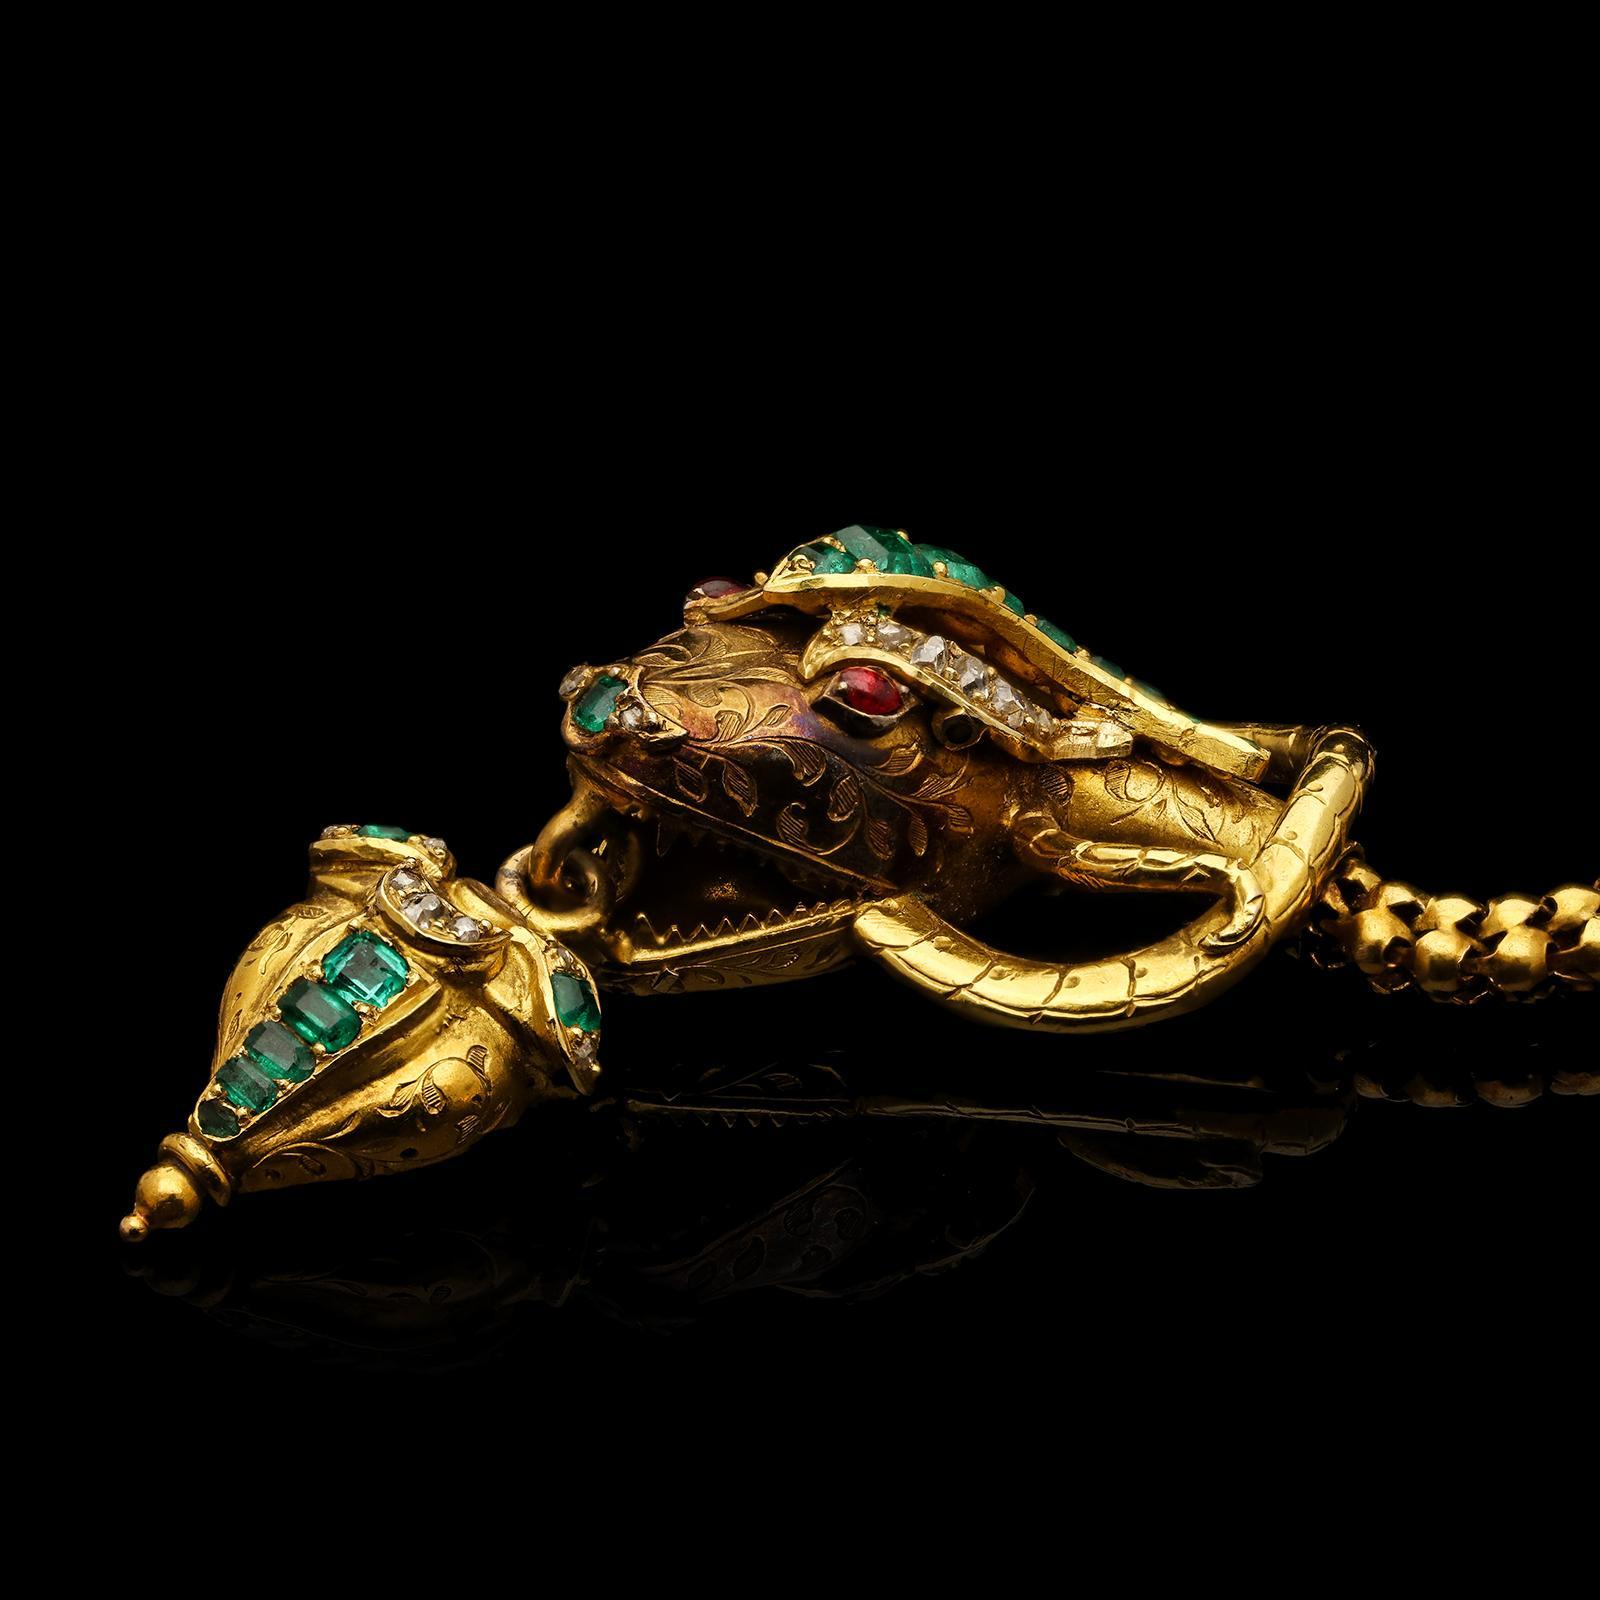 Women's or Men's Antique Emerald, Diamond and Gold Snake Necklace by Hancocks, circa 1870